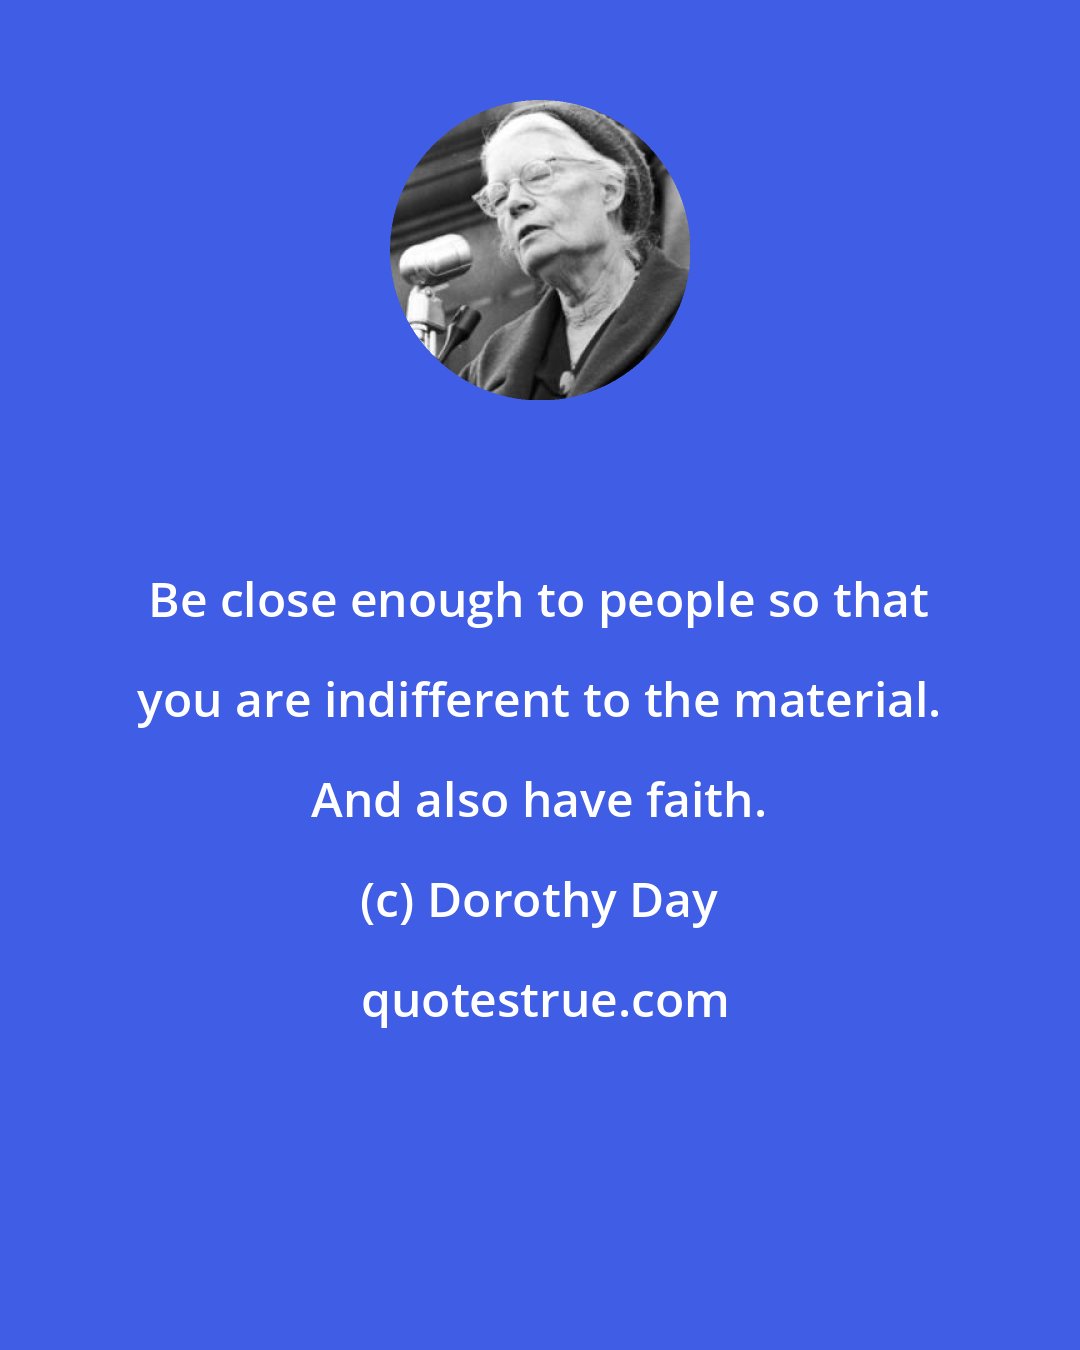 Dorothy Day: Be close enough to people so that you are indifferent to the material. And also have faith.